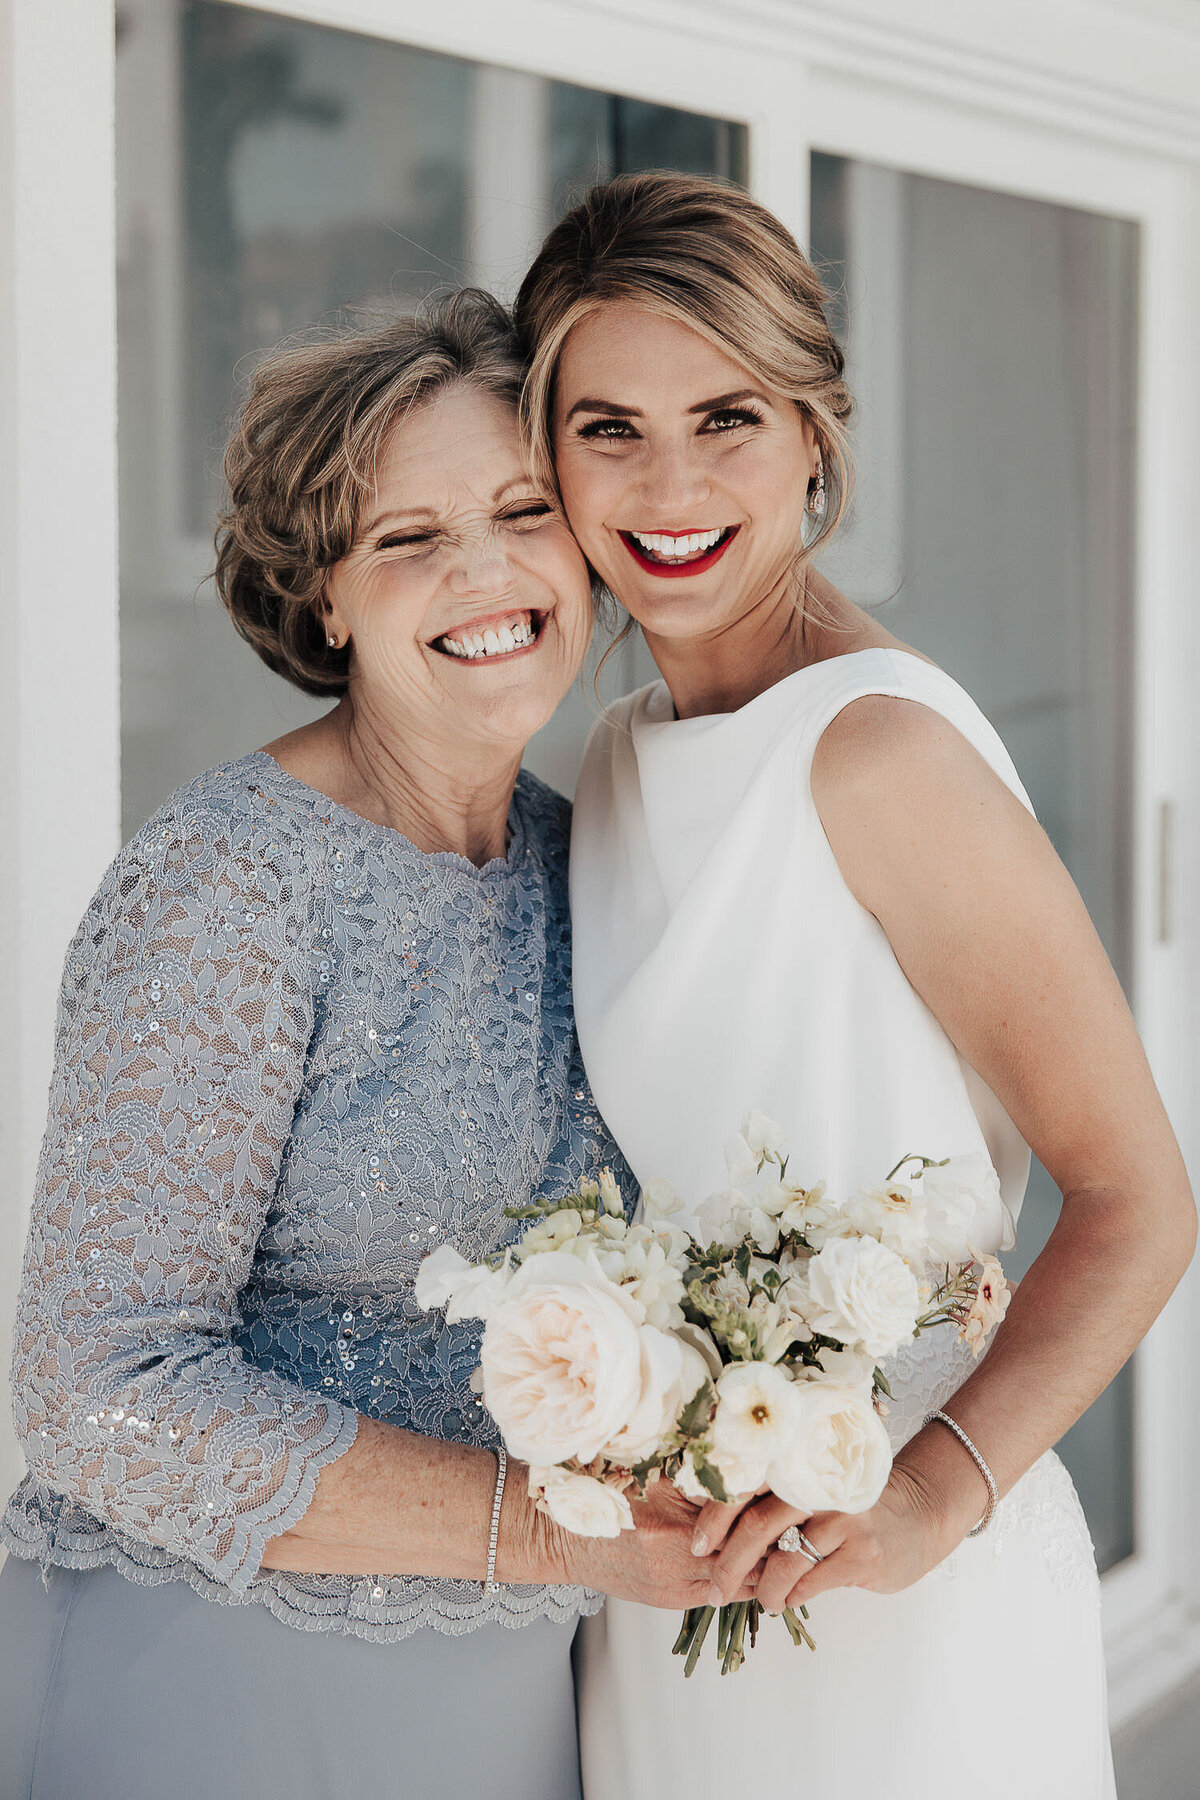 Bride and Mother of the Bride happily smiling together